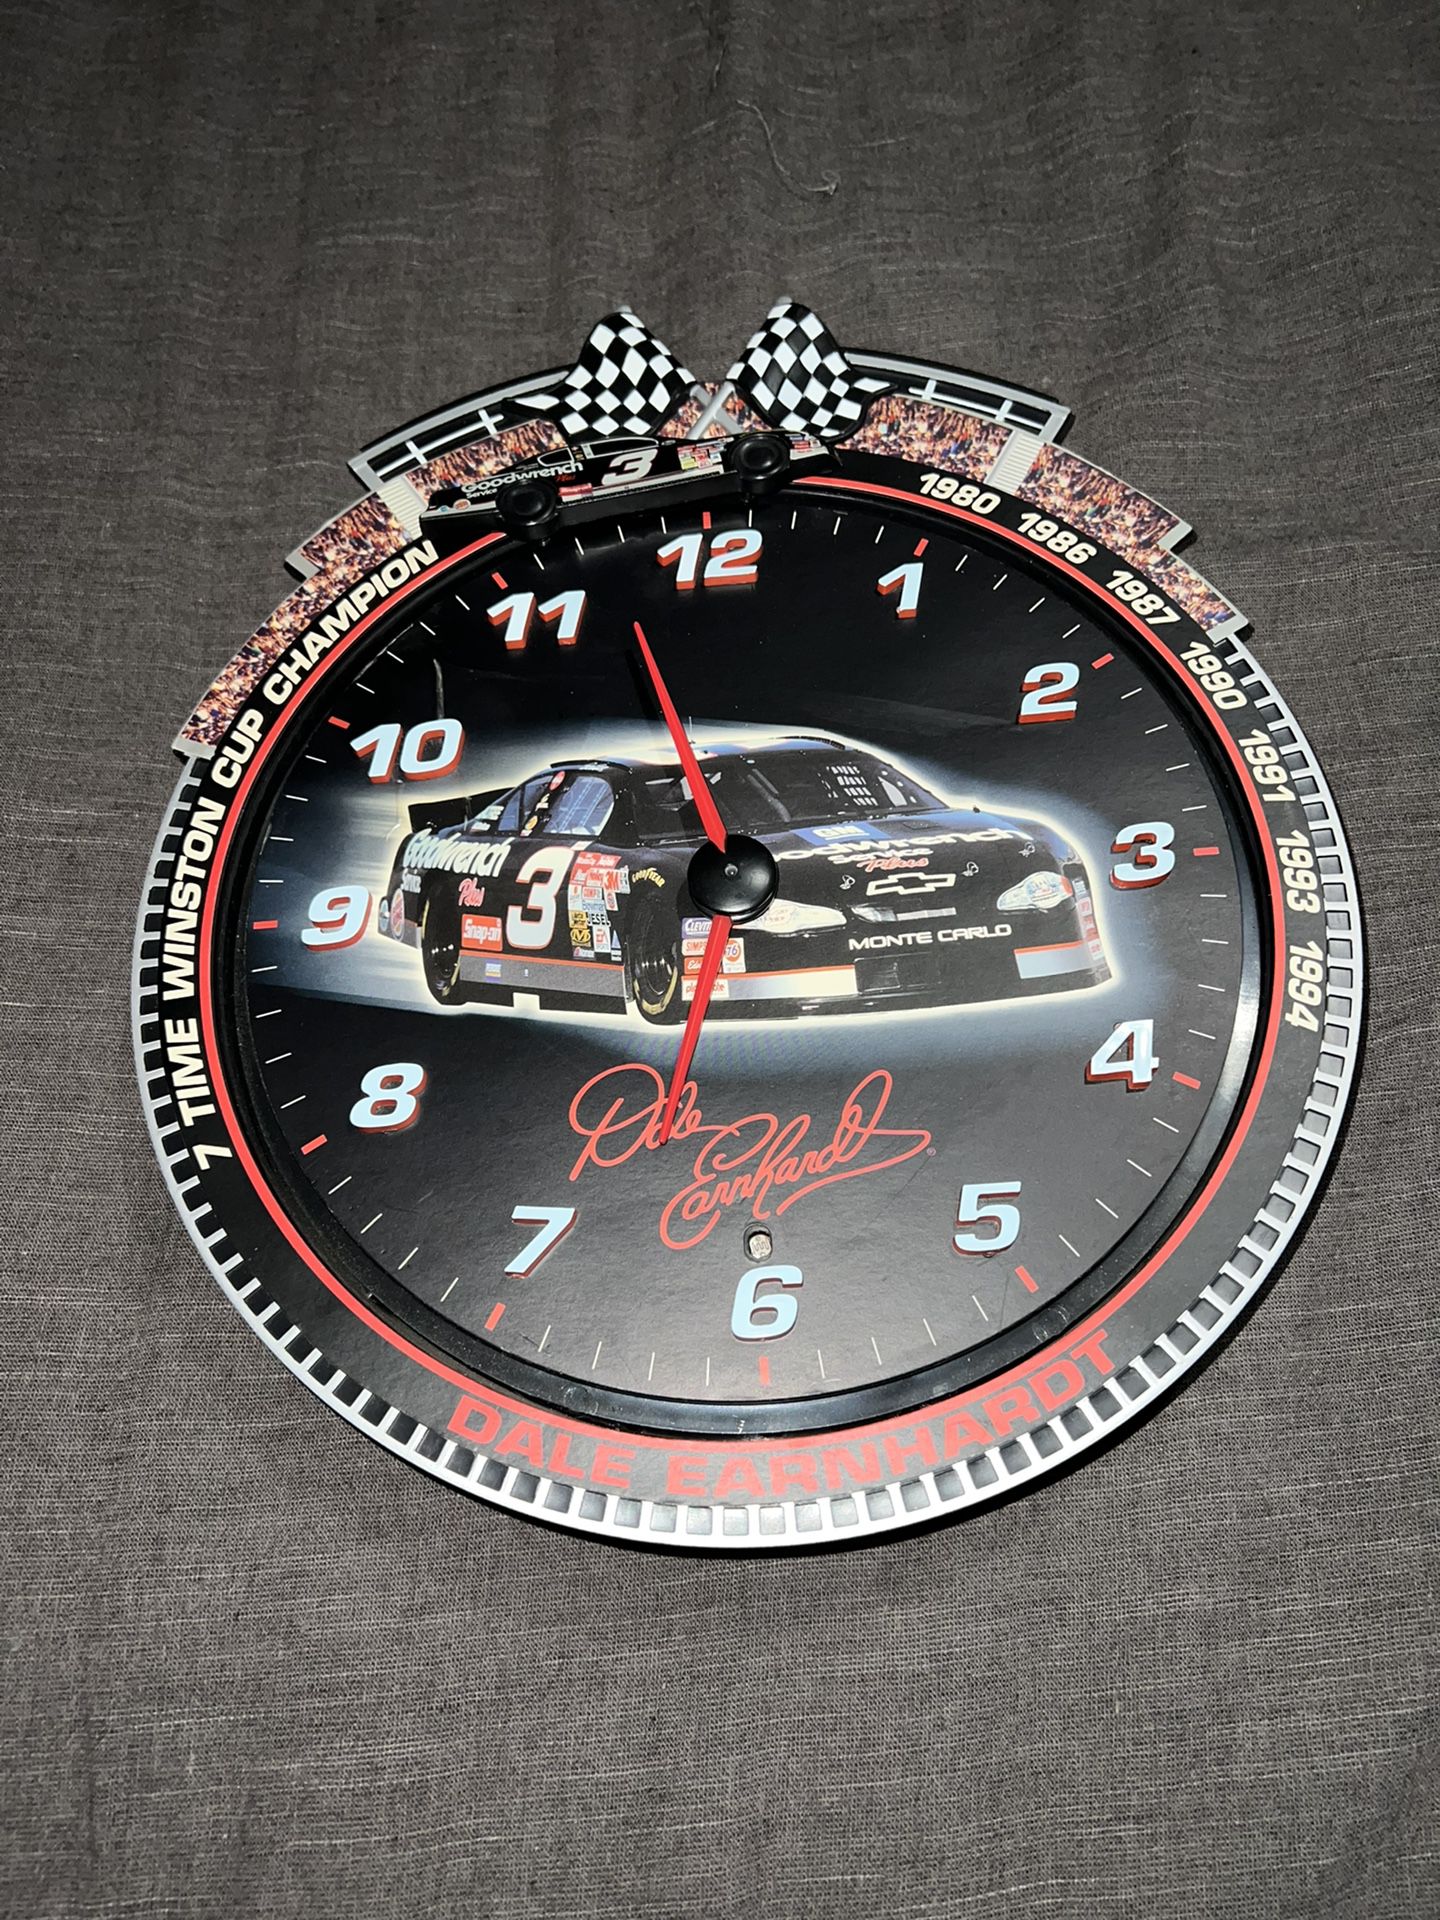 Collectible Dale Earnhardt Sr.#3 Wall RACE CLOCK with Real RACING SOUND